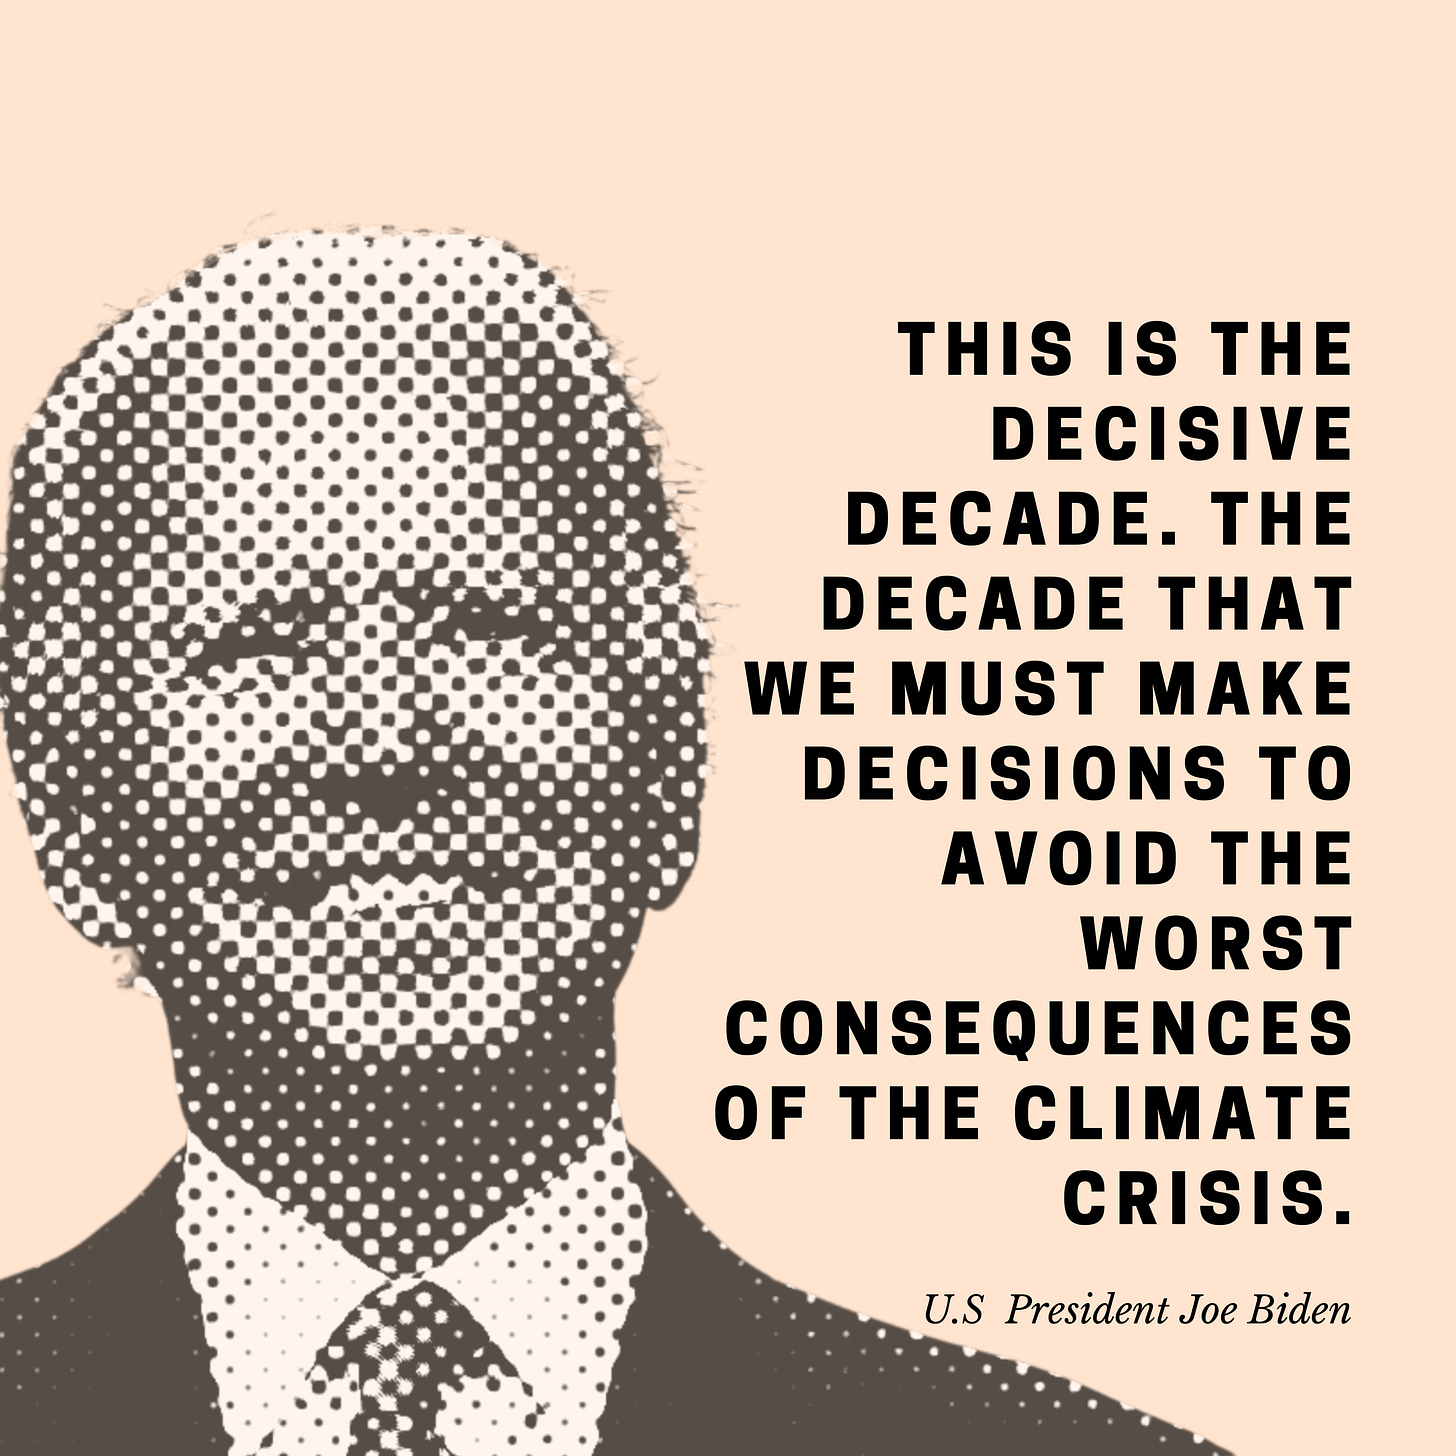 This is the decisive Decade. The decade that we must make decisions to avoid the worst consequences of the climate crisis. - US President Joe Biden